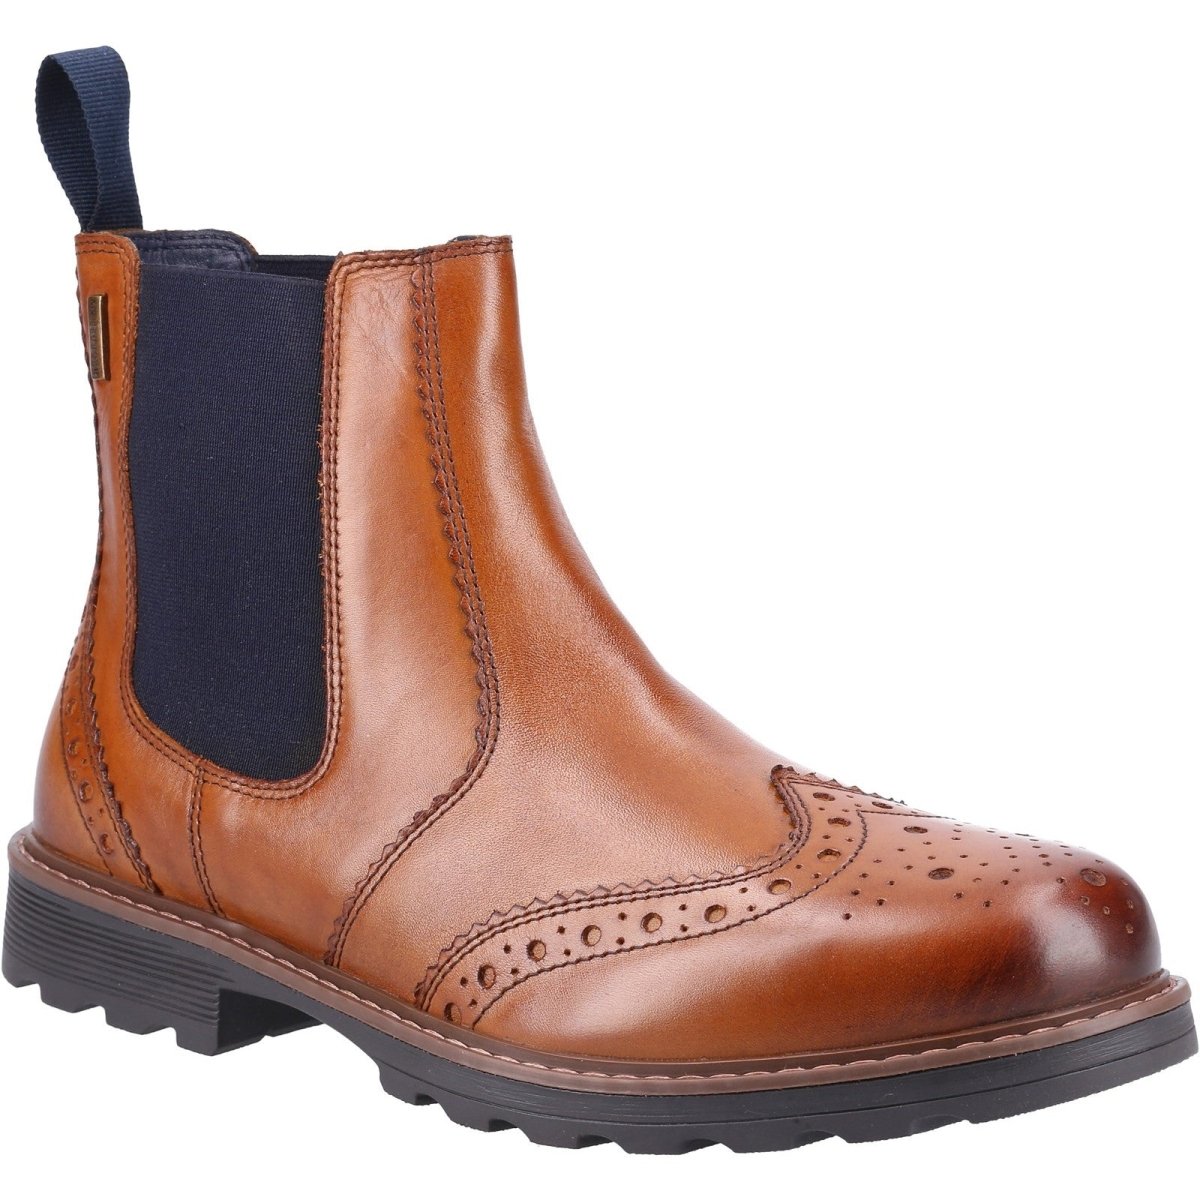 Cotswold Ford Boots - Shoe Store Direct